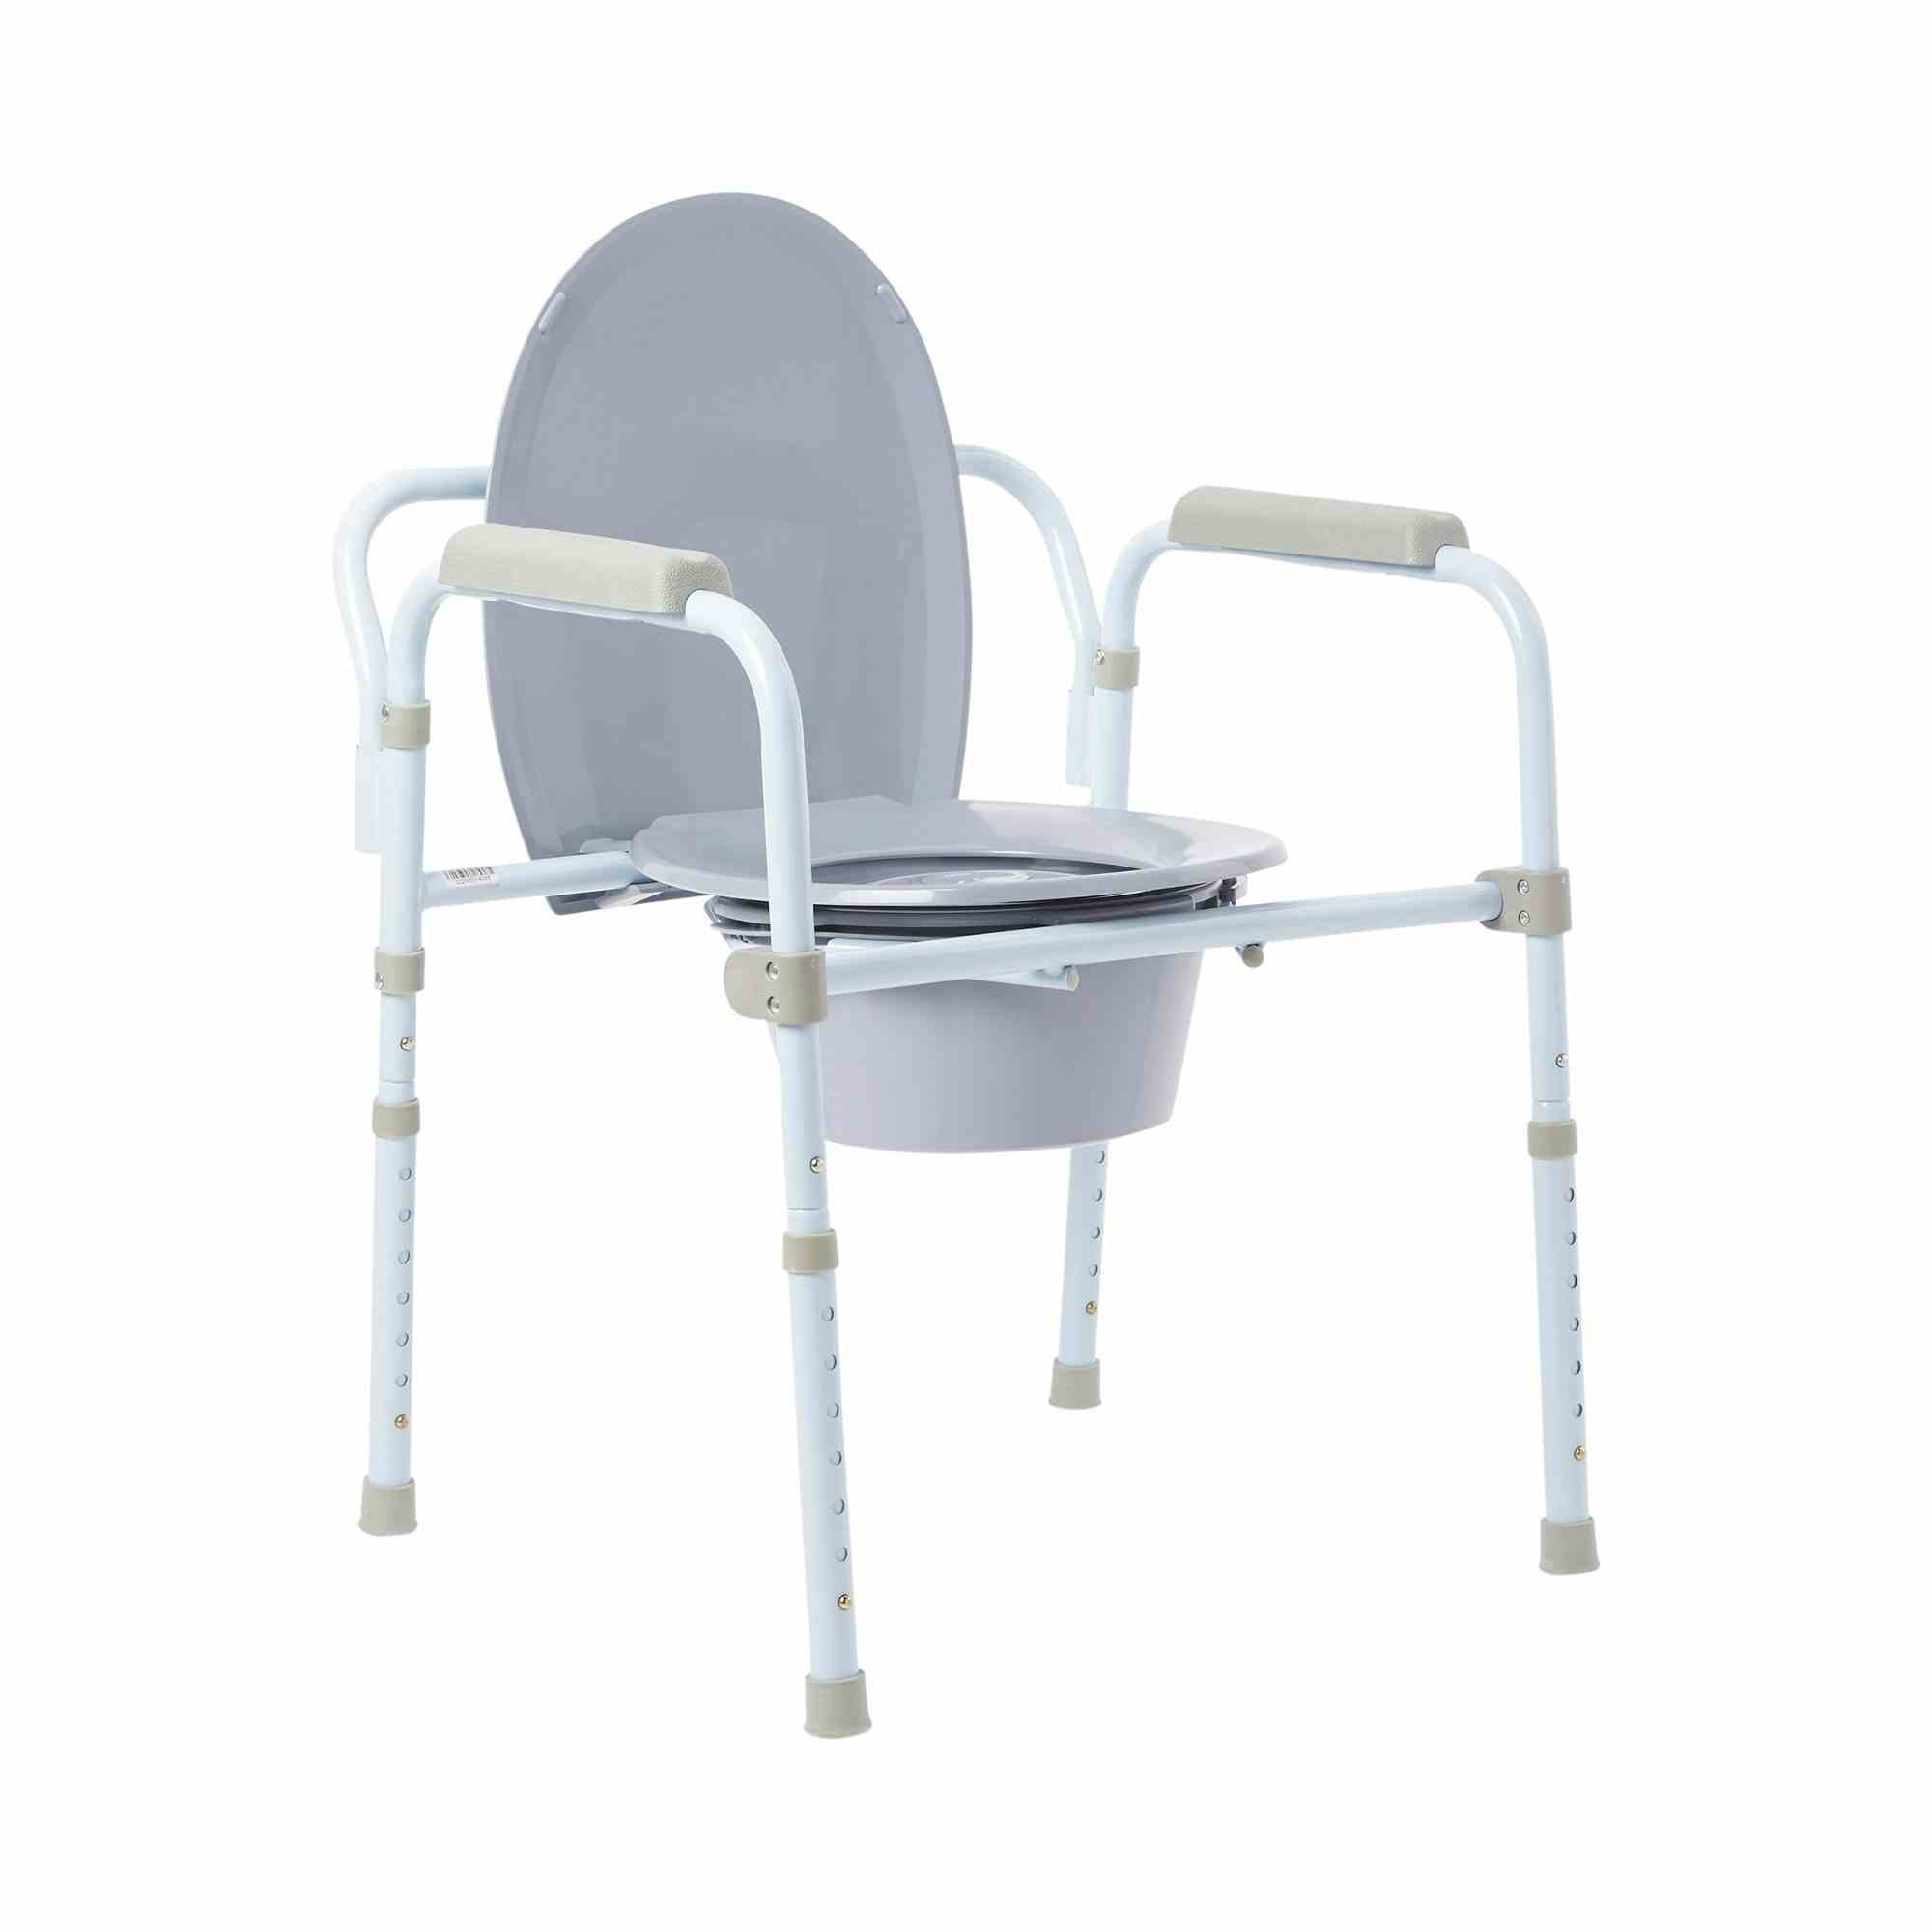 McKesson Fixed Arm Steel Folding Commode Chair, 146-RTL11158KDR, 13.75" - 1 Each